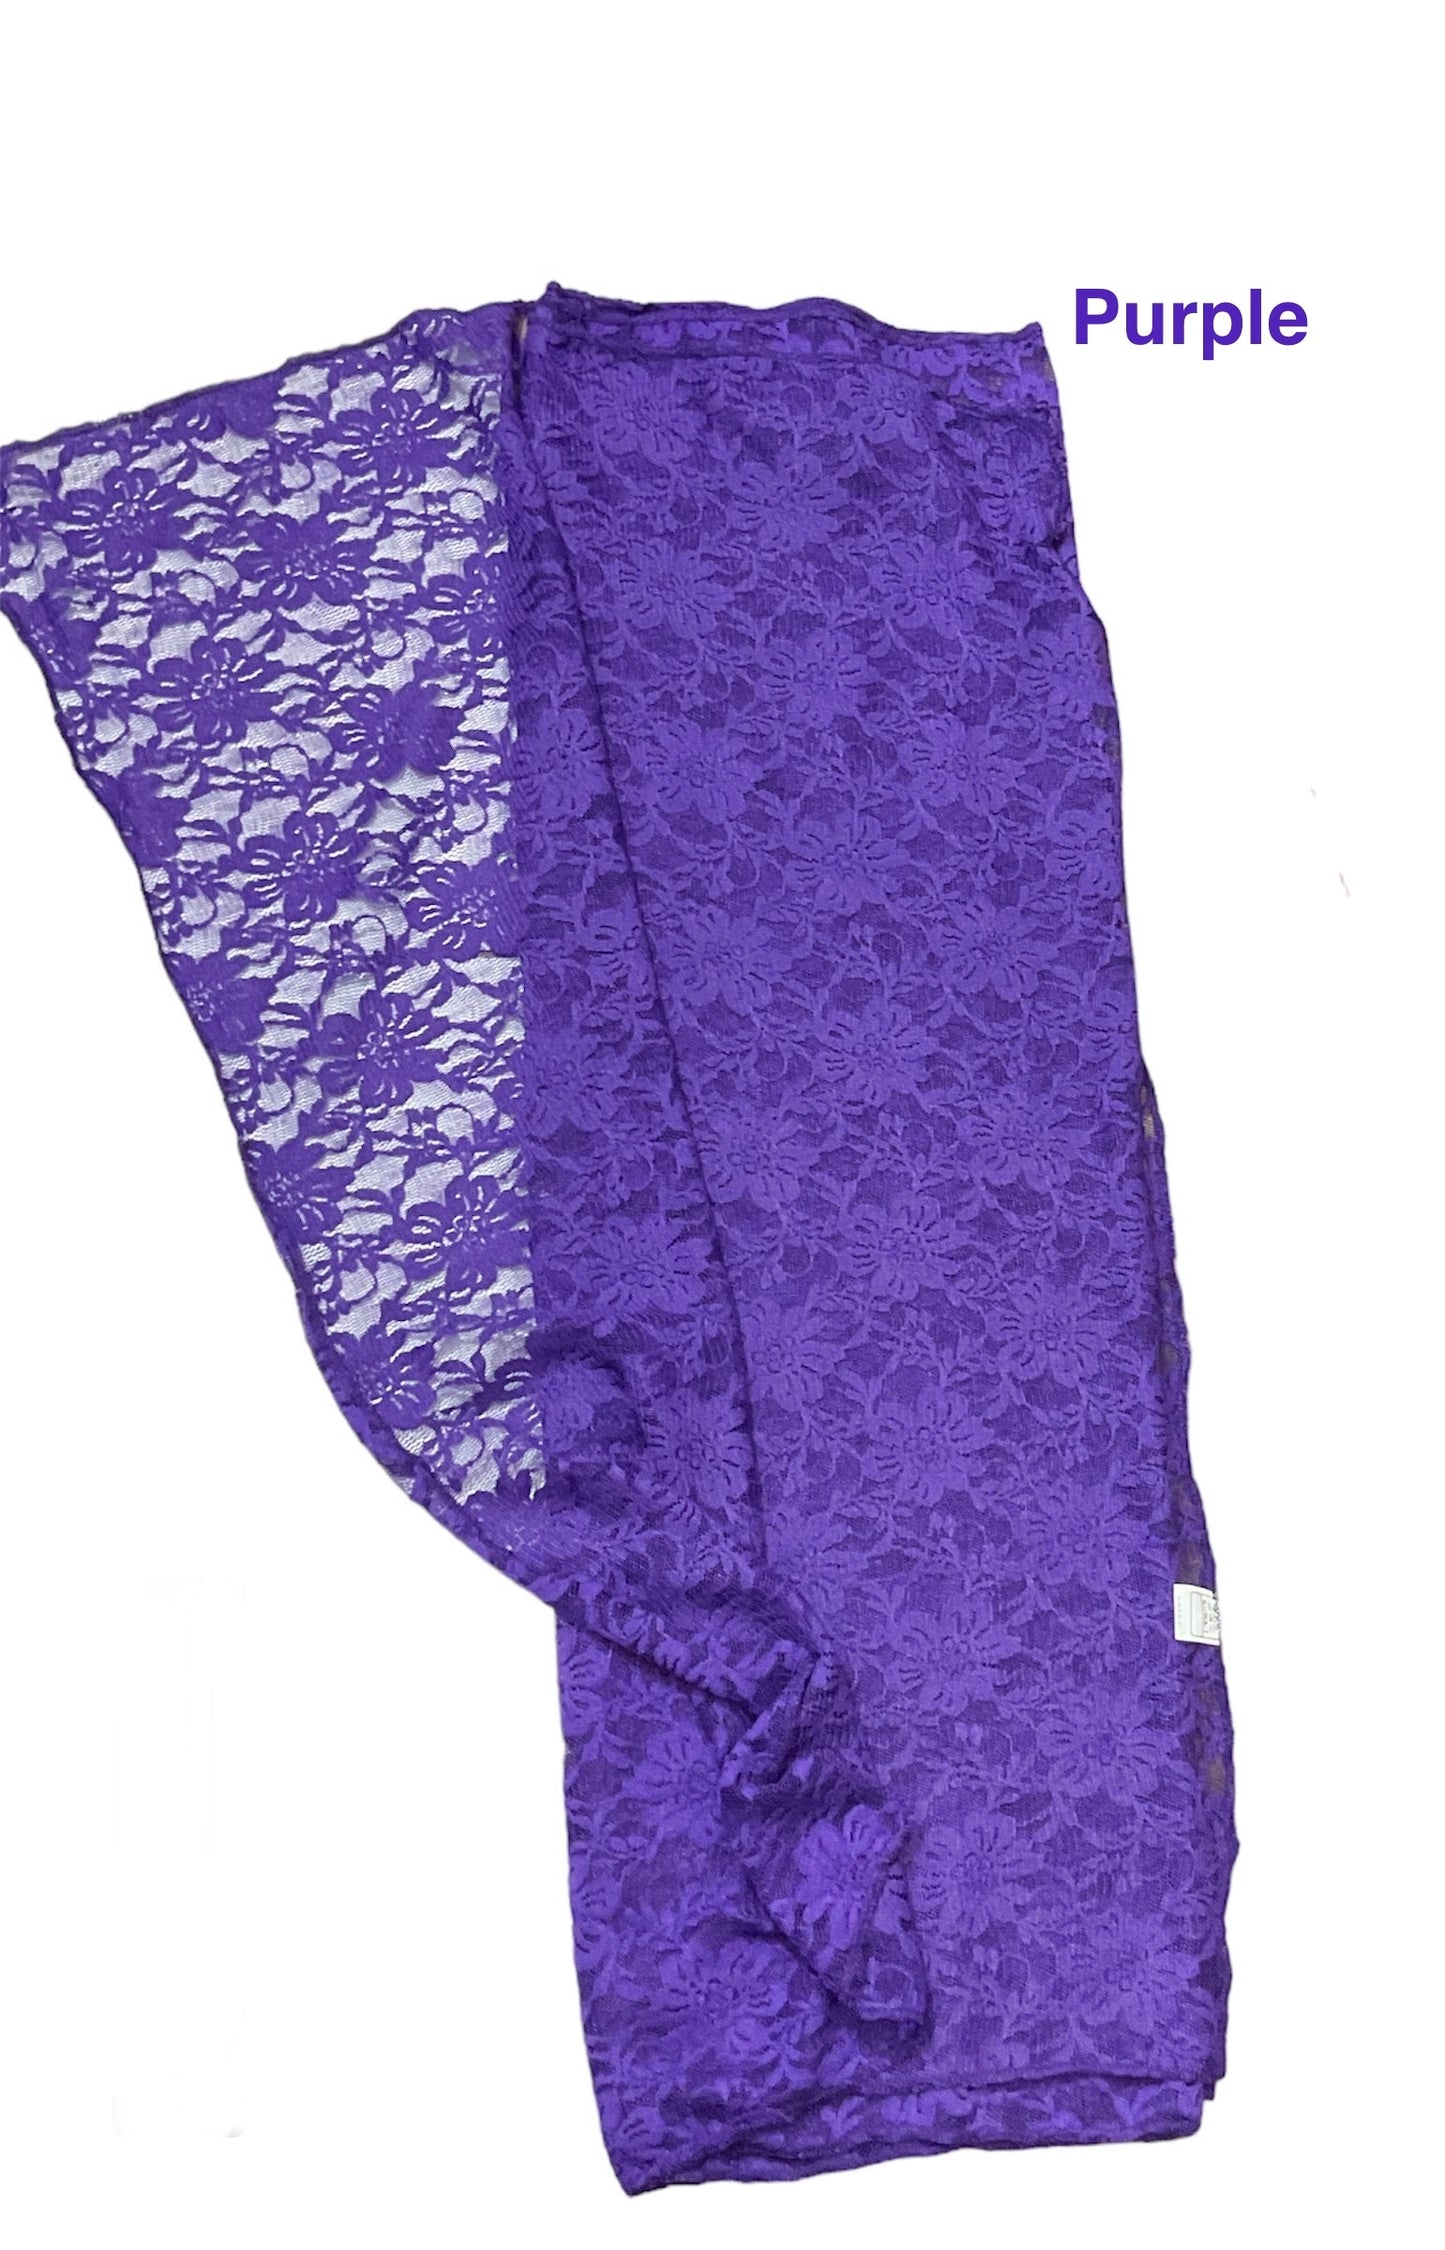 Very elegent stretch lace Shawls made in Kuwait